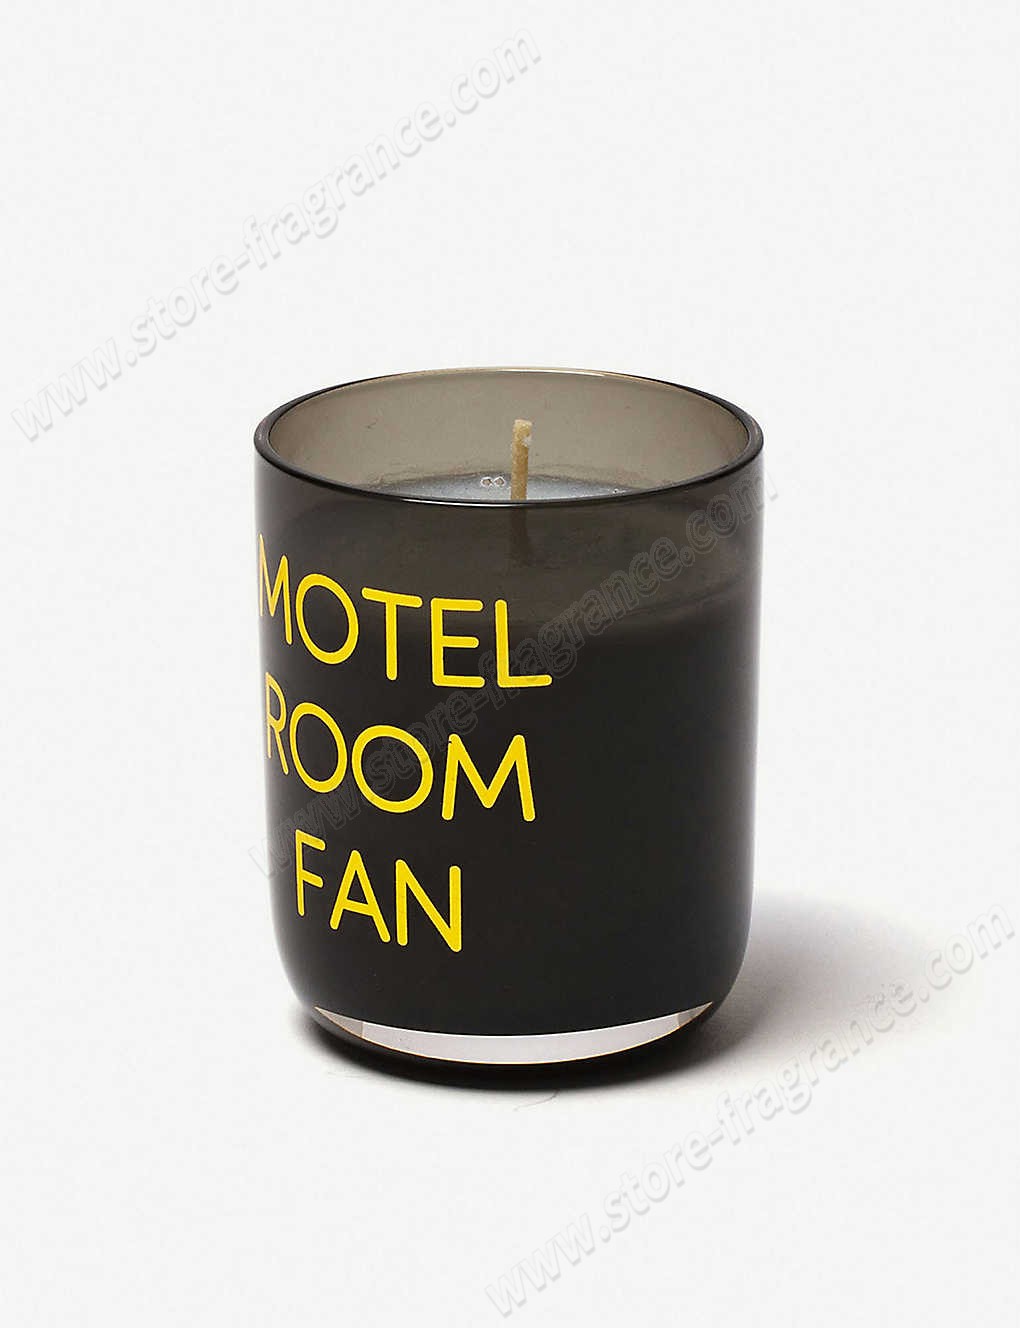 SELETTI/Memories Motel Room Fan scented candle 110g ✿ Discount Store - -1